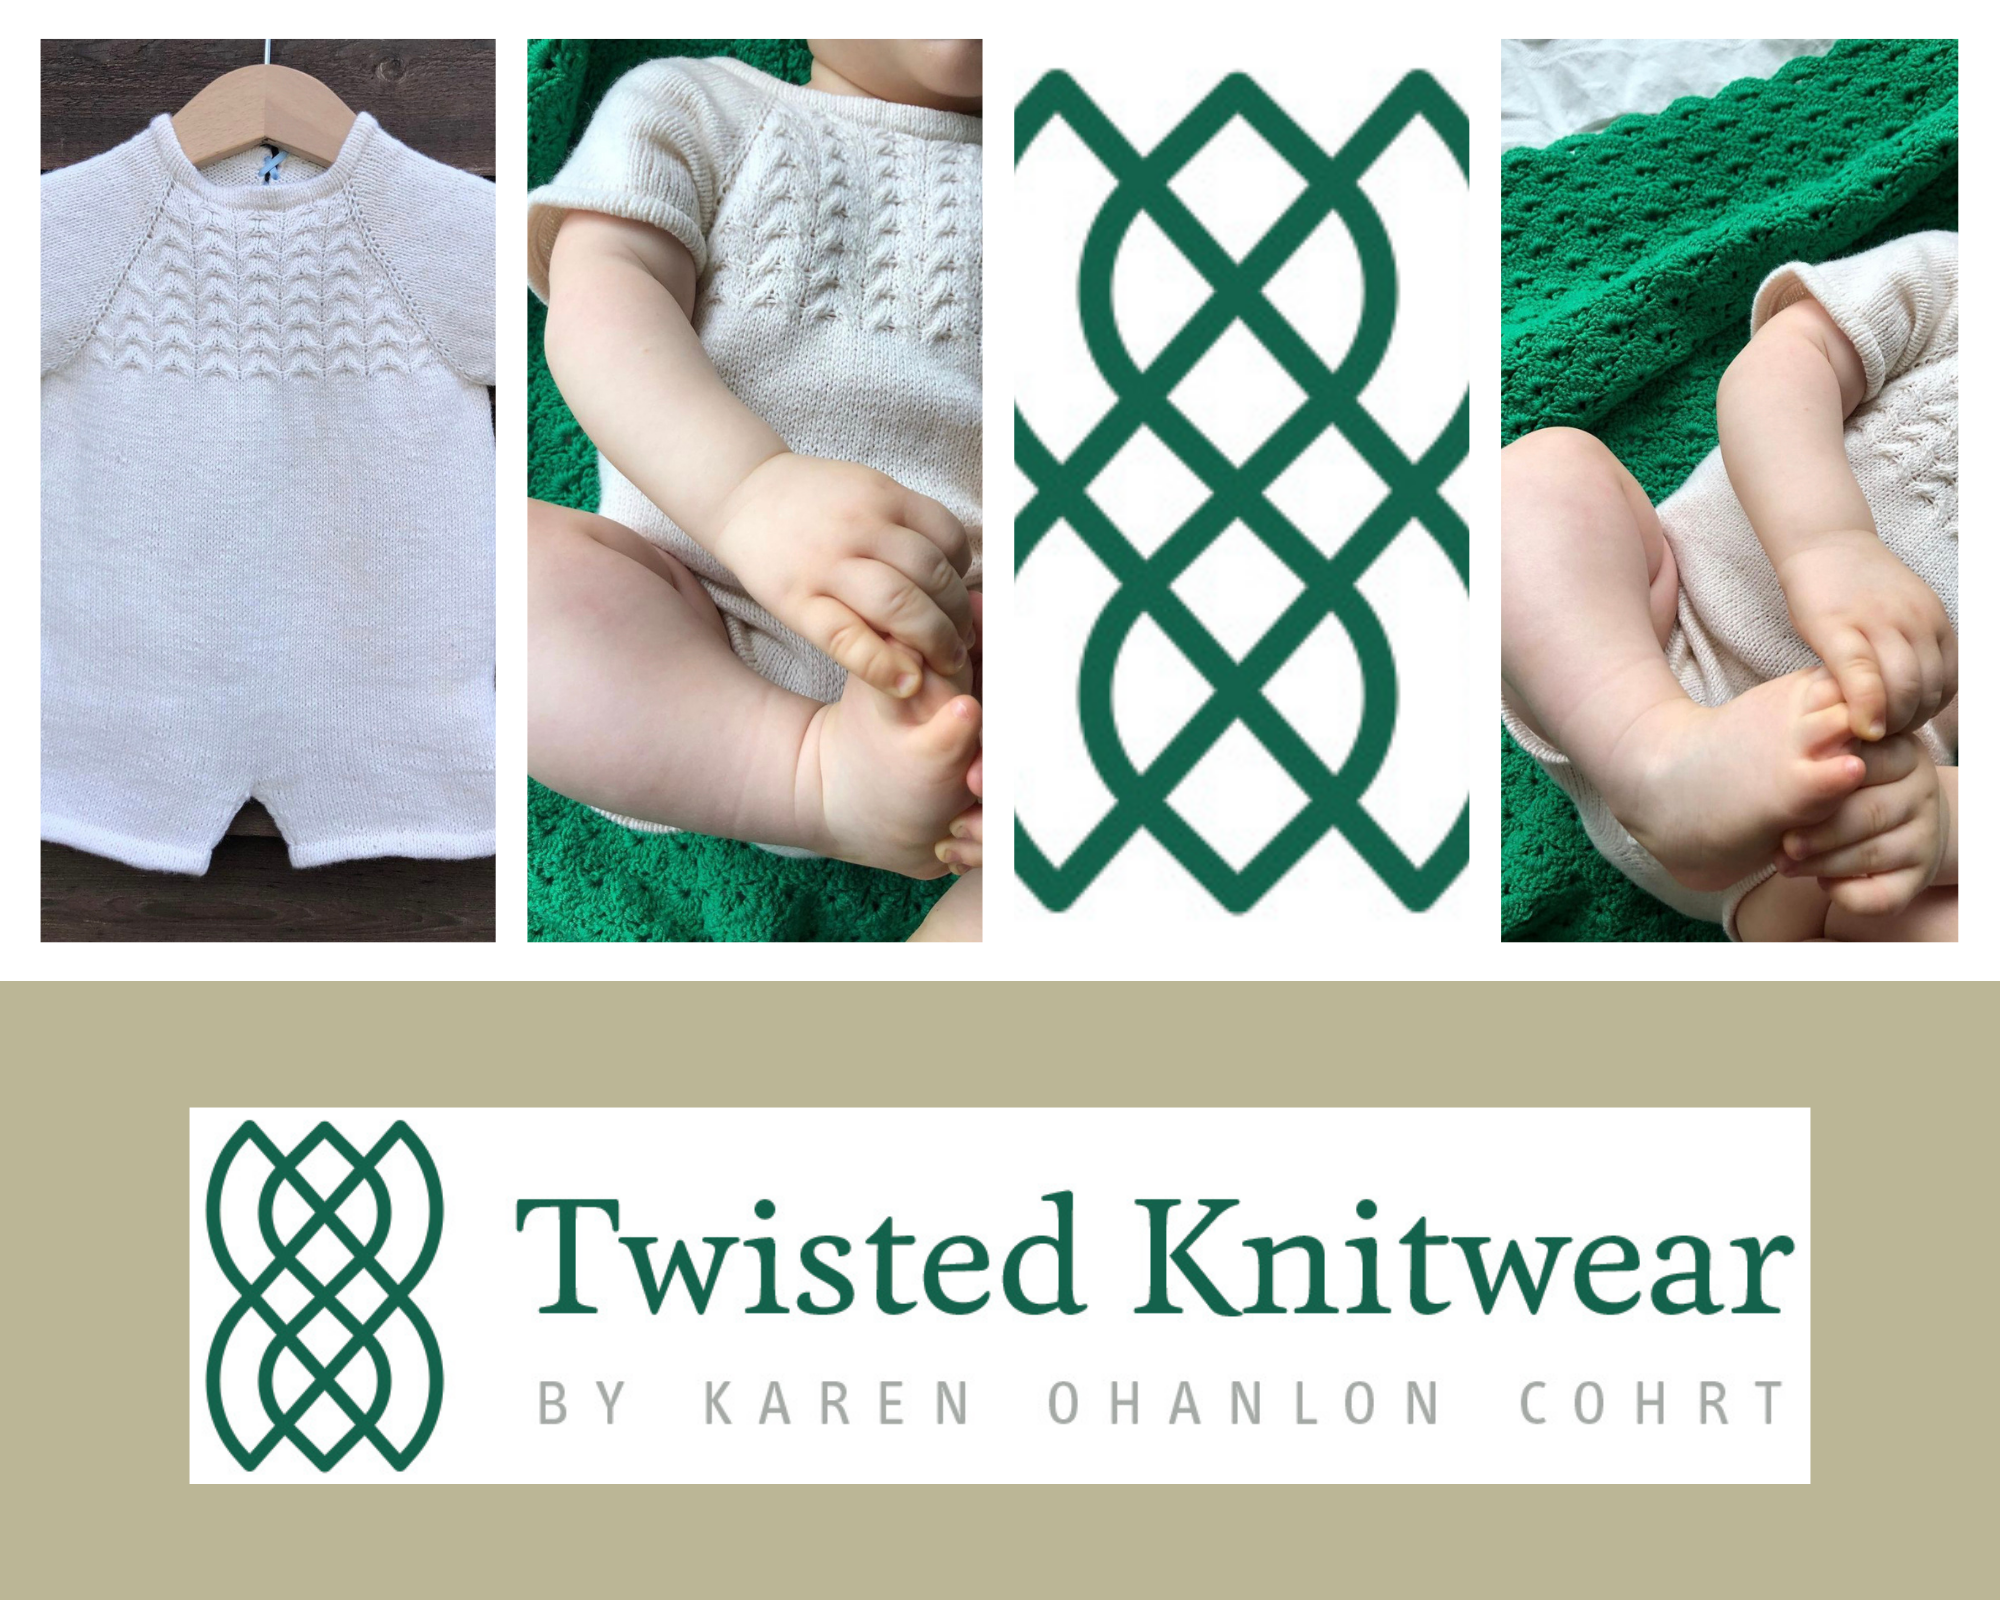 Modern Knitwear with inspiration from Ireland.